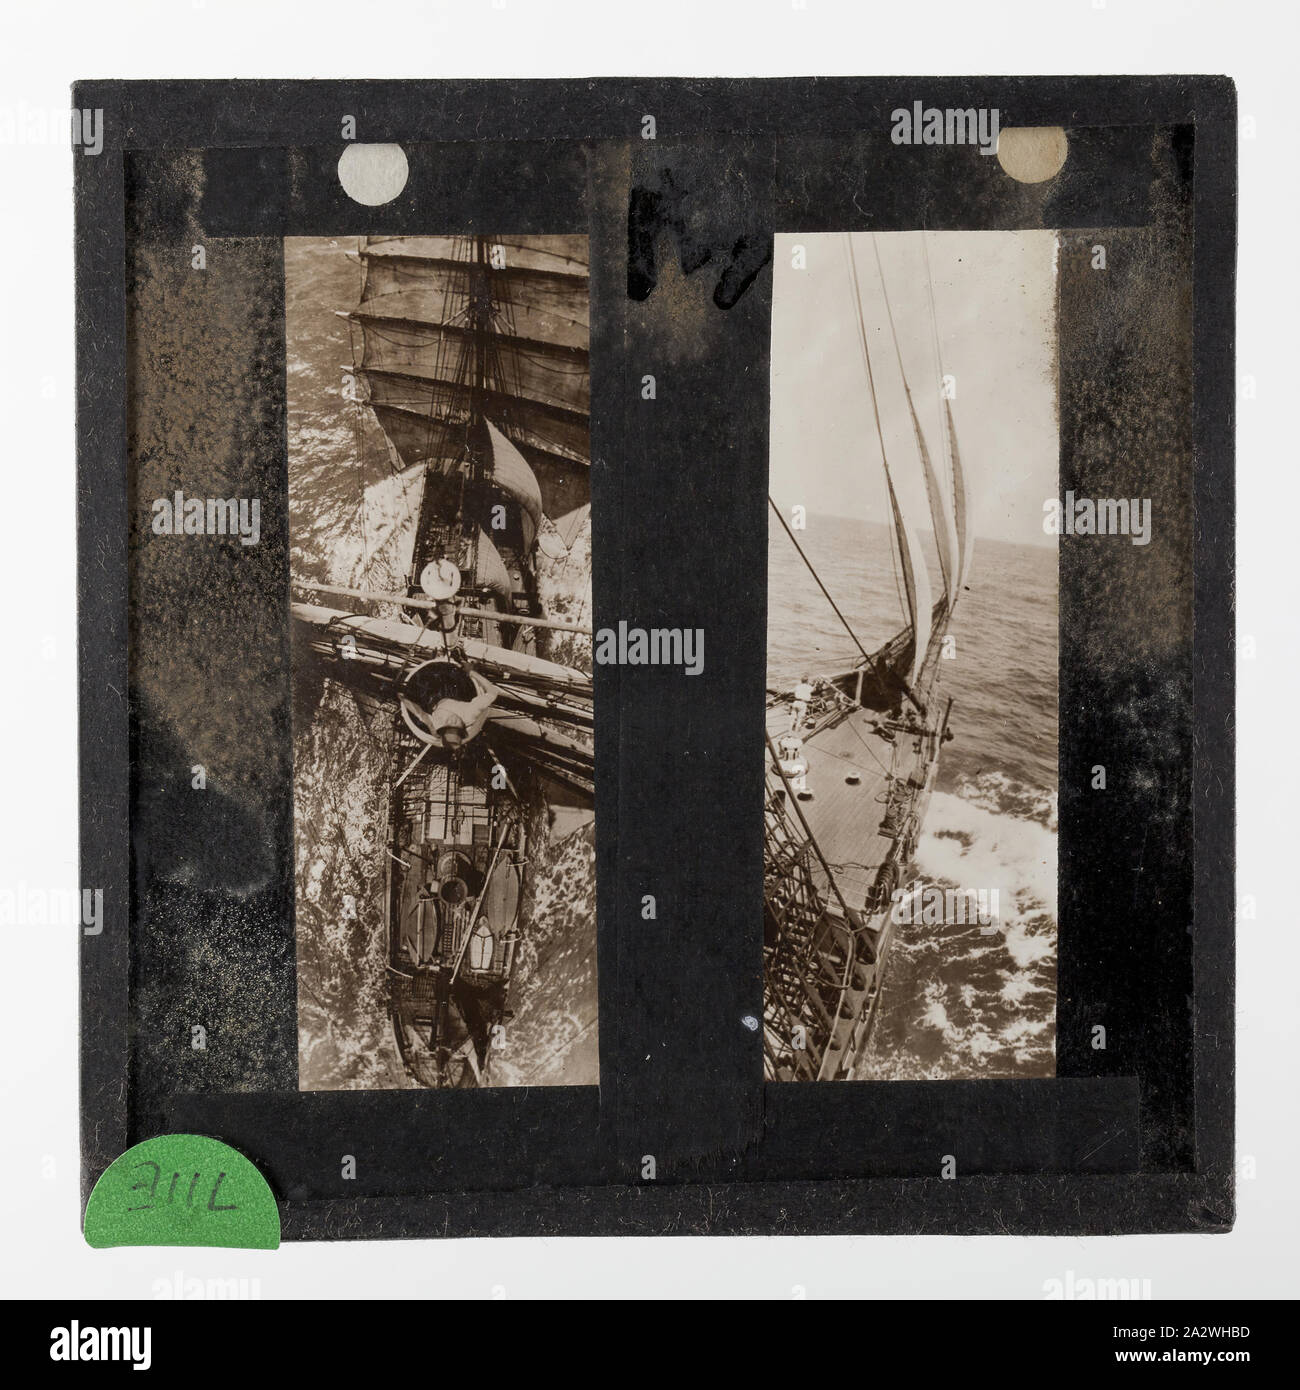 Lantern Slide - 'Captain Hurley in the Barrel', BANZARE Voyage 1, Antarctica, 1929-1930, Lantern slide of the ship Discovery, Antarctica. One of 328 images in various formats including artworks, photographs, glass negatives and lantern slides Stock Photo